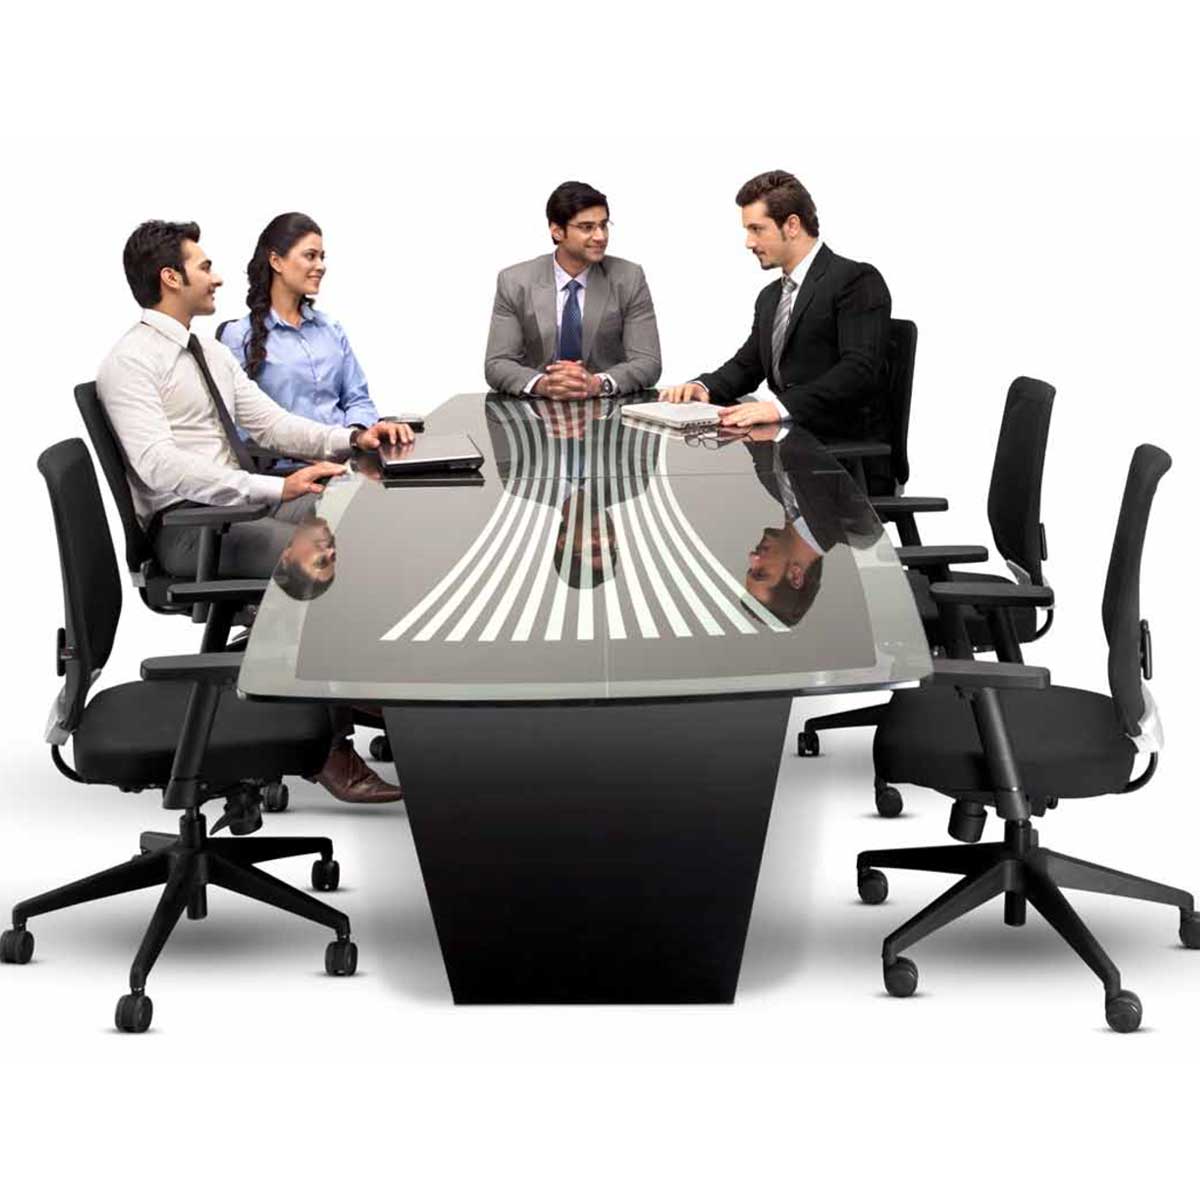 Conference table Manufacturers, Suppliers in Dwarka Sector 24